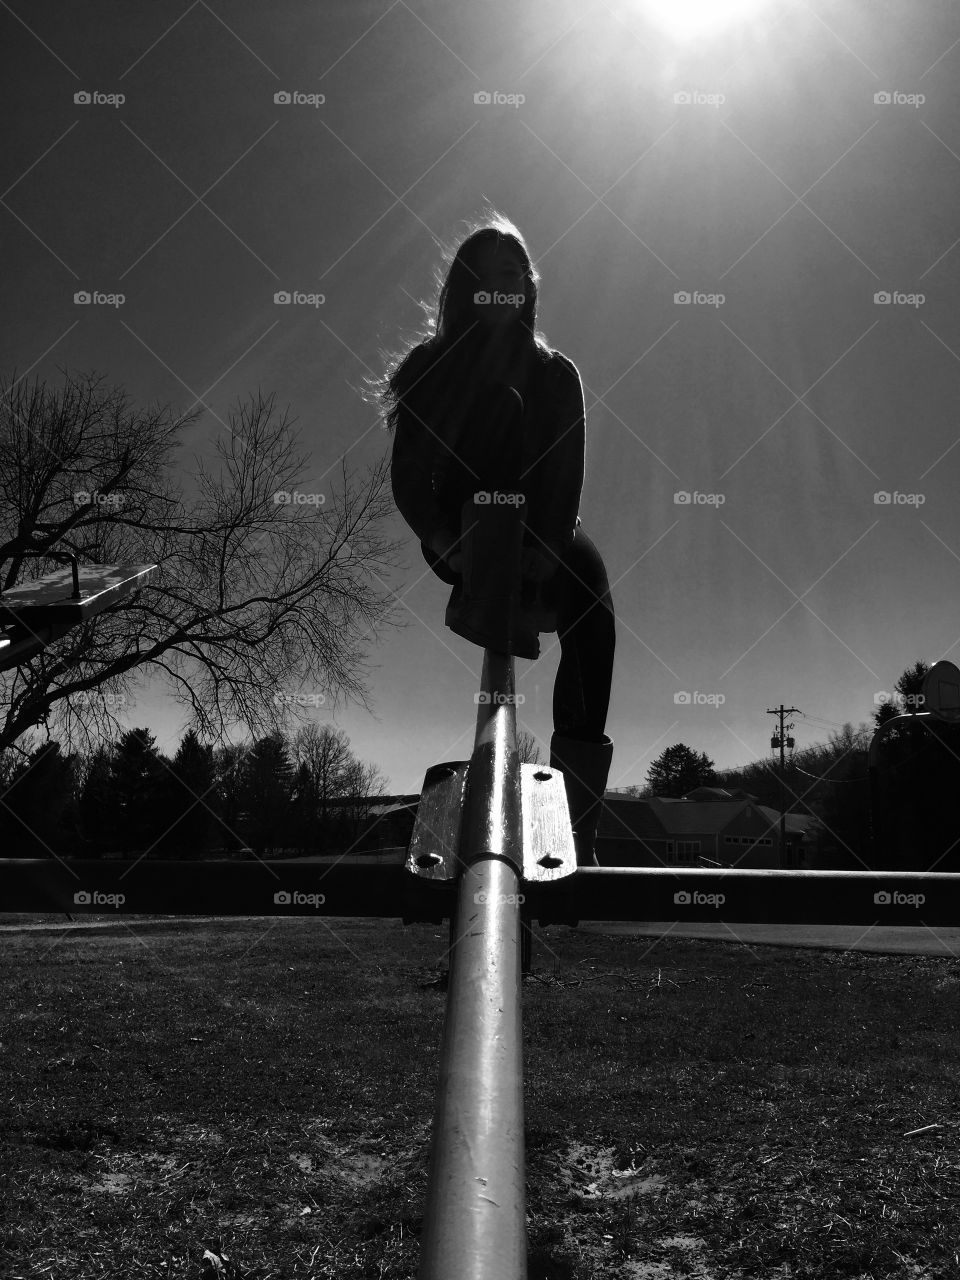 Seesaw.. A girl on a seesaw 